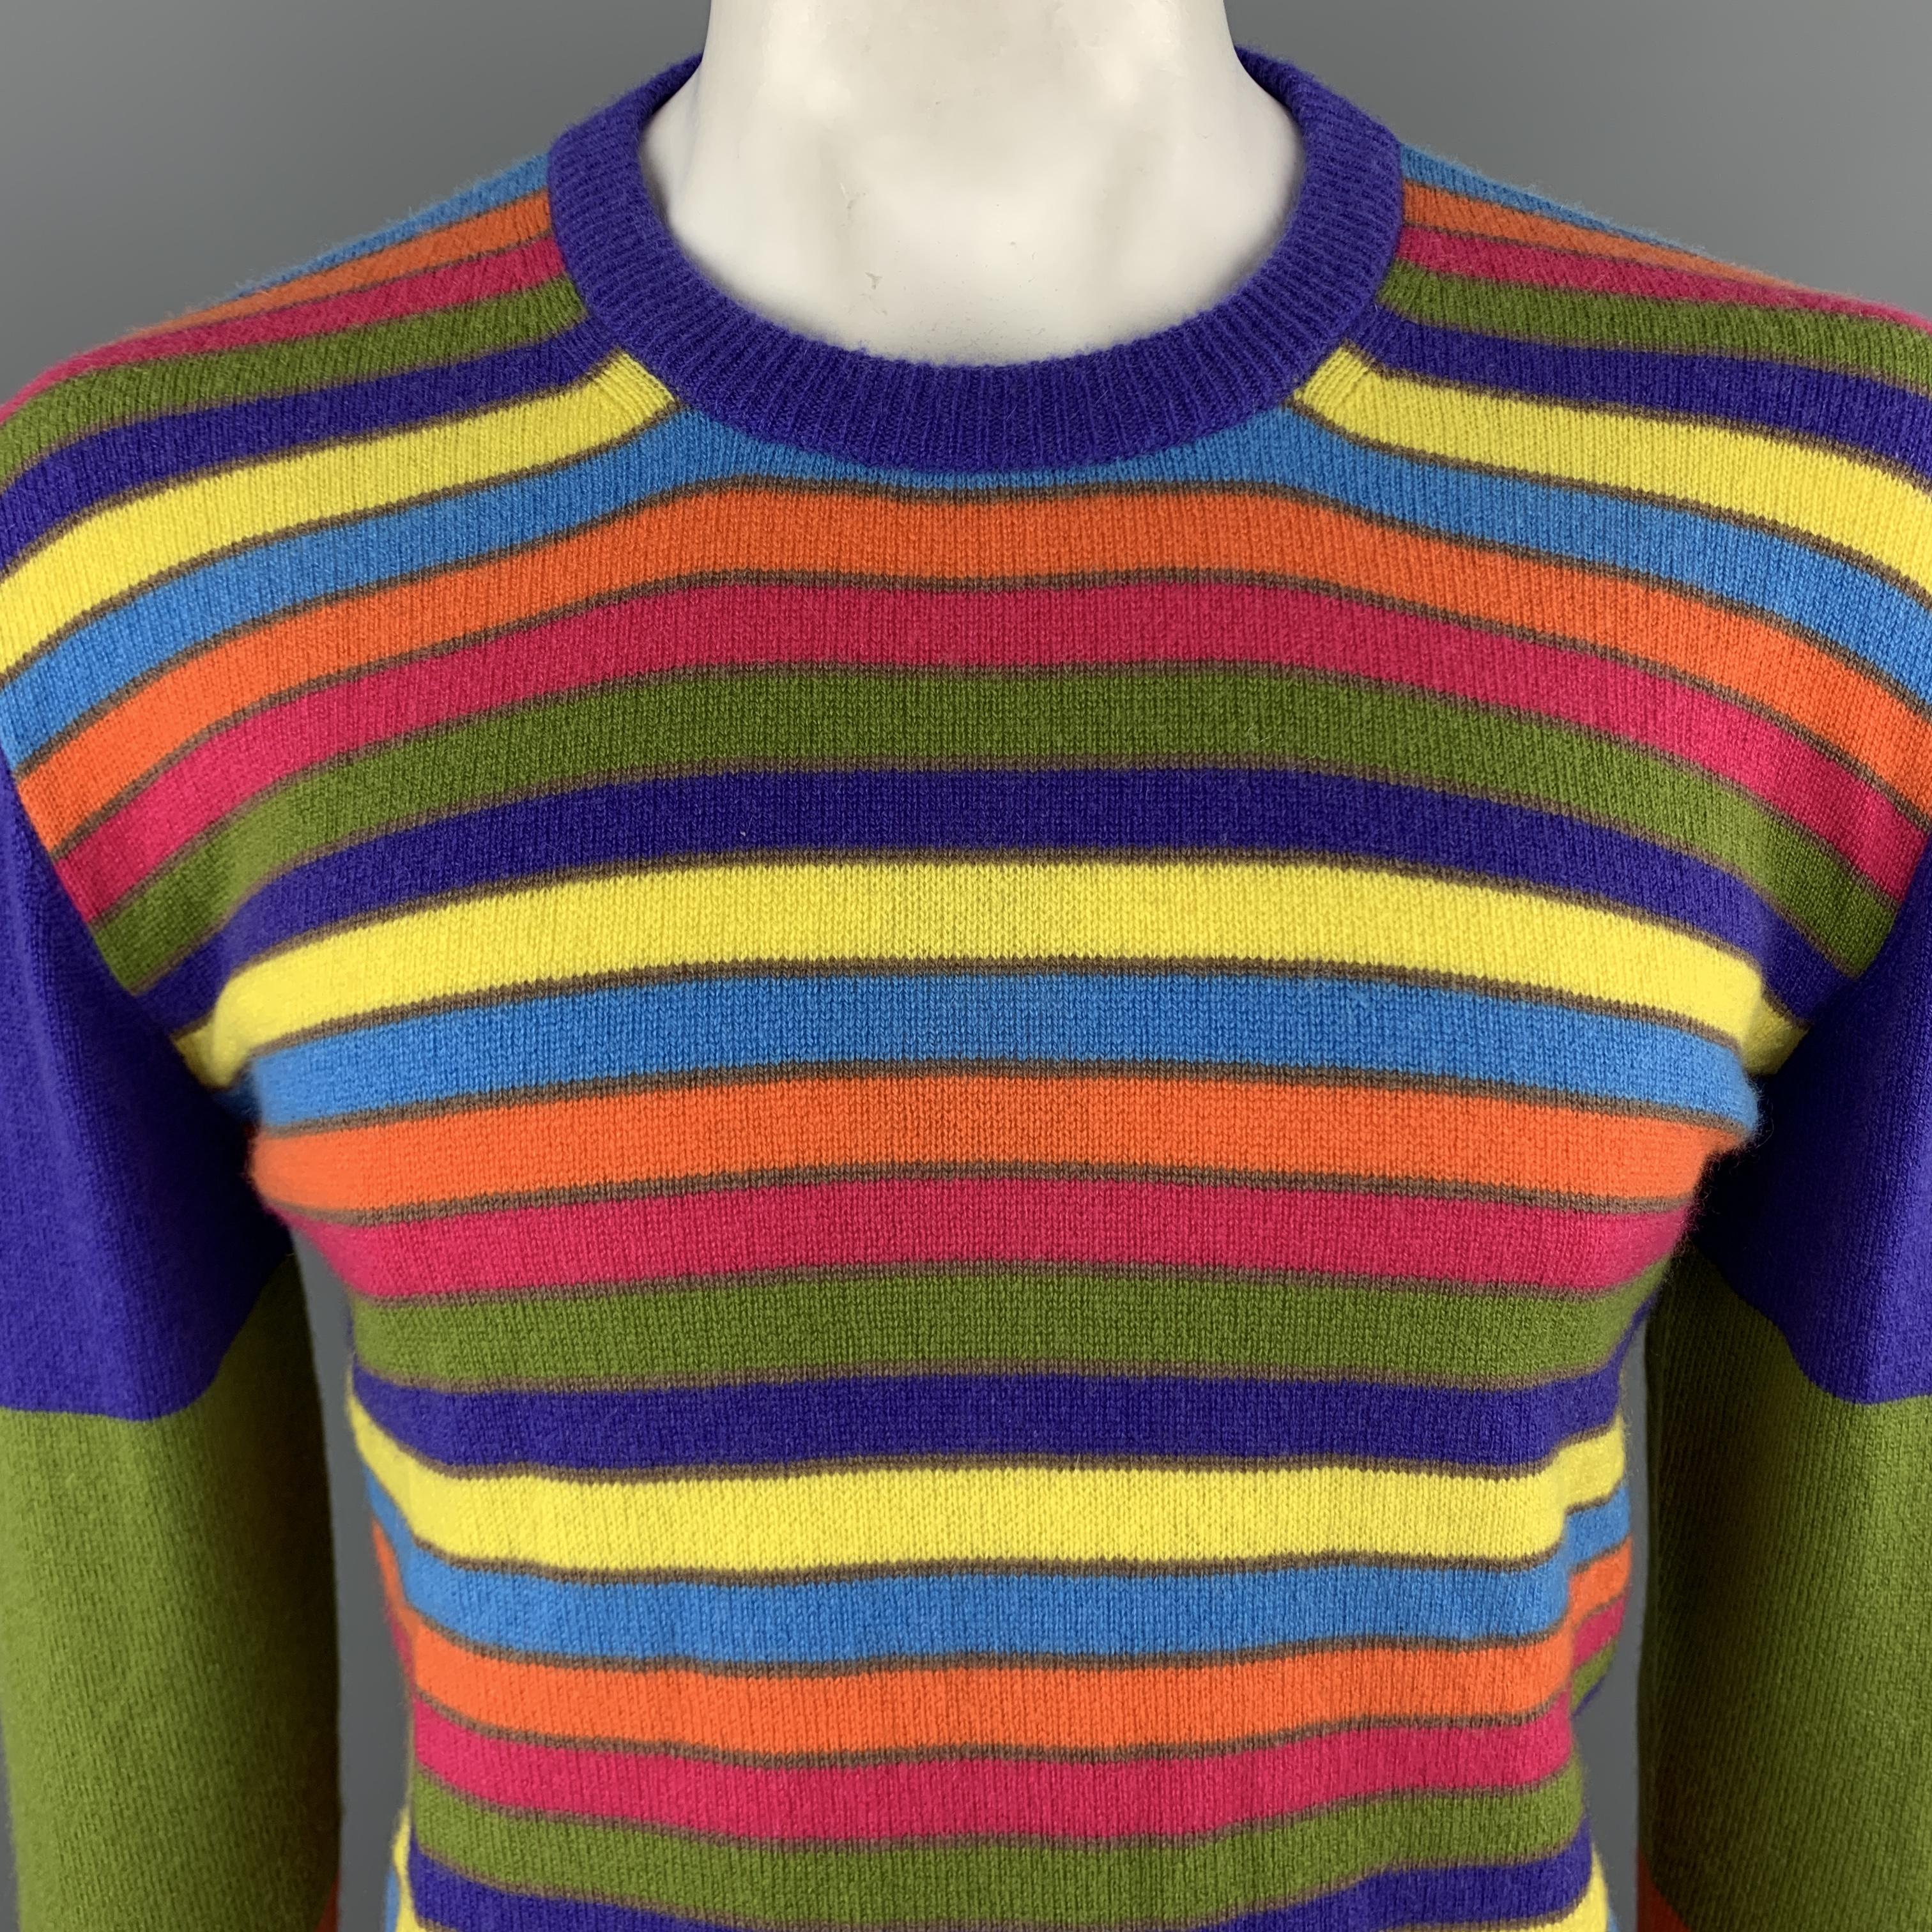 ETRO Pullover Sweater comes in multi-color tones in a striped cashmere material, with a crewneck, and ribbed cuffs and hem. 

Excellent Pre-Owned Condition.
Marked: L

Measurements:

Shoulder: 18.5 in. 
Chest: 42 in. 
Sleeve: 26.5 in. 
Length: 28 in.